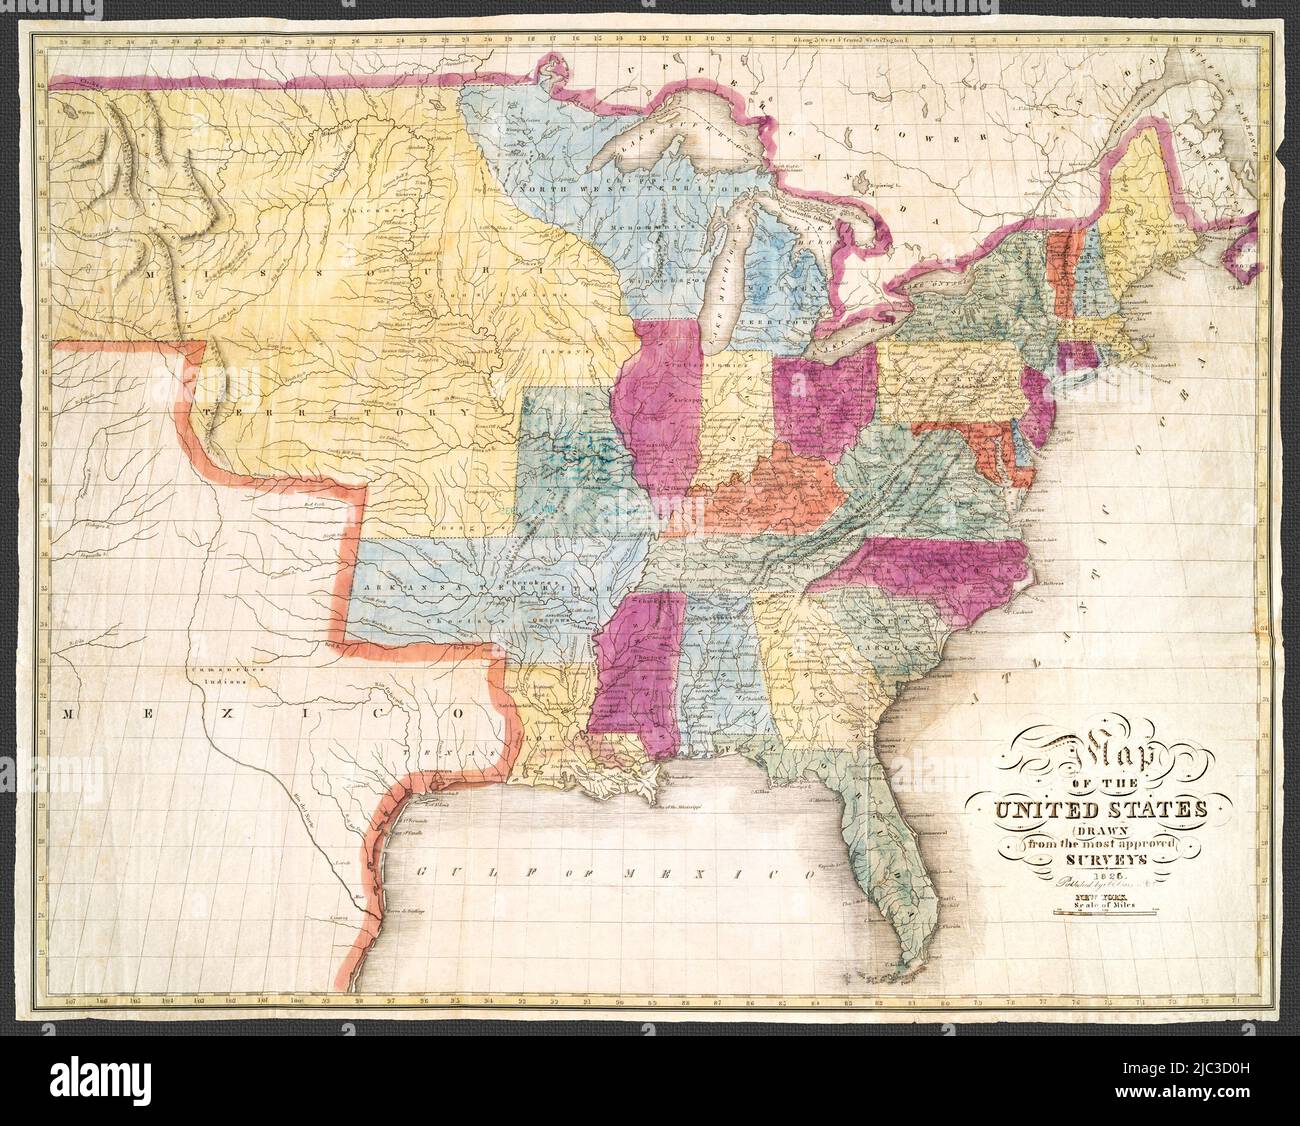 Original title: Map of the United States: drawn from the most approved surveys. Published 1826.Shows borders and other important political and geographic features. Gives prime meridians from both Greenwich and Washington, D.C. Gives general locations of Native American tribes. Stock Photo